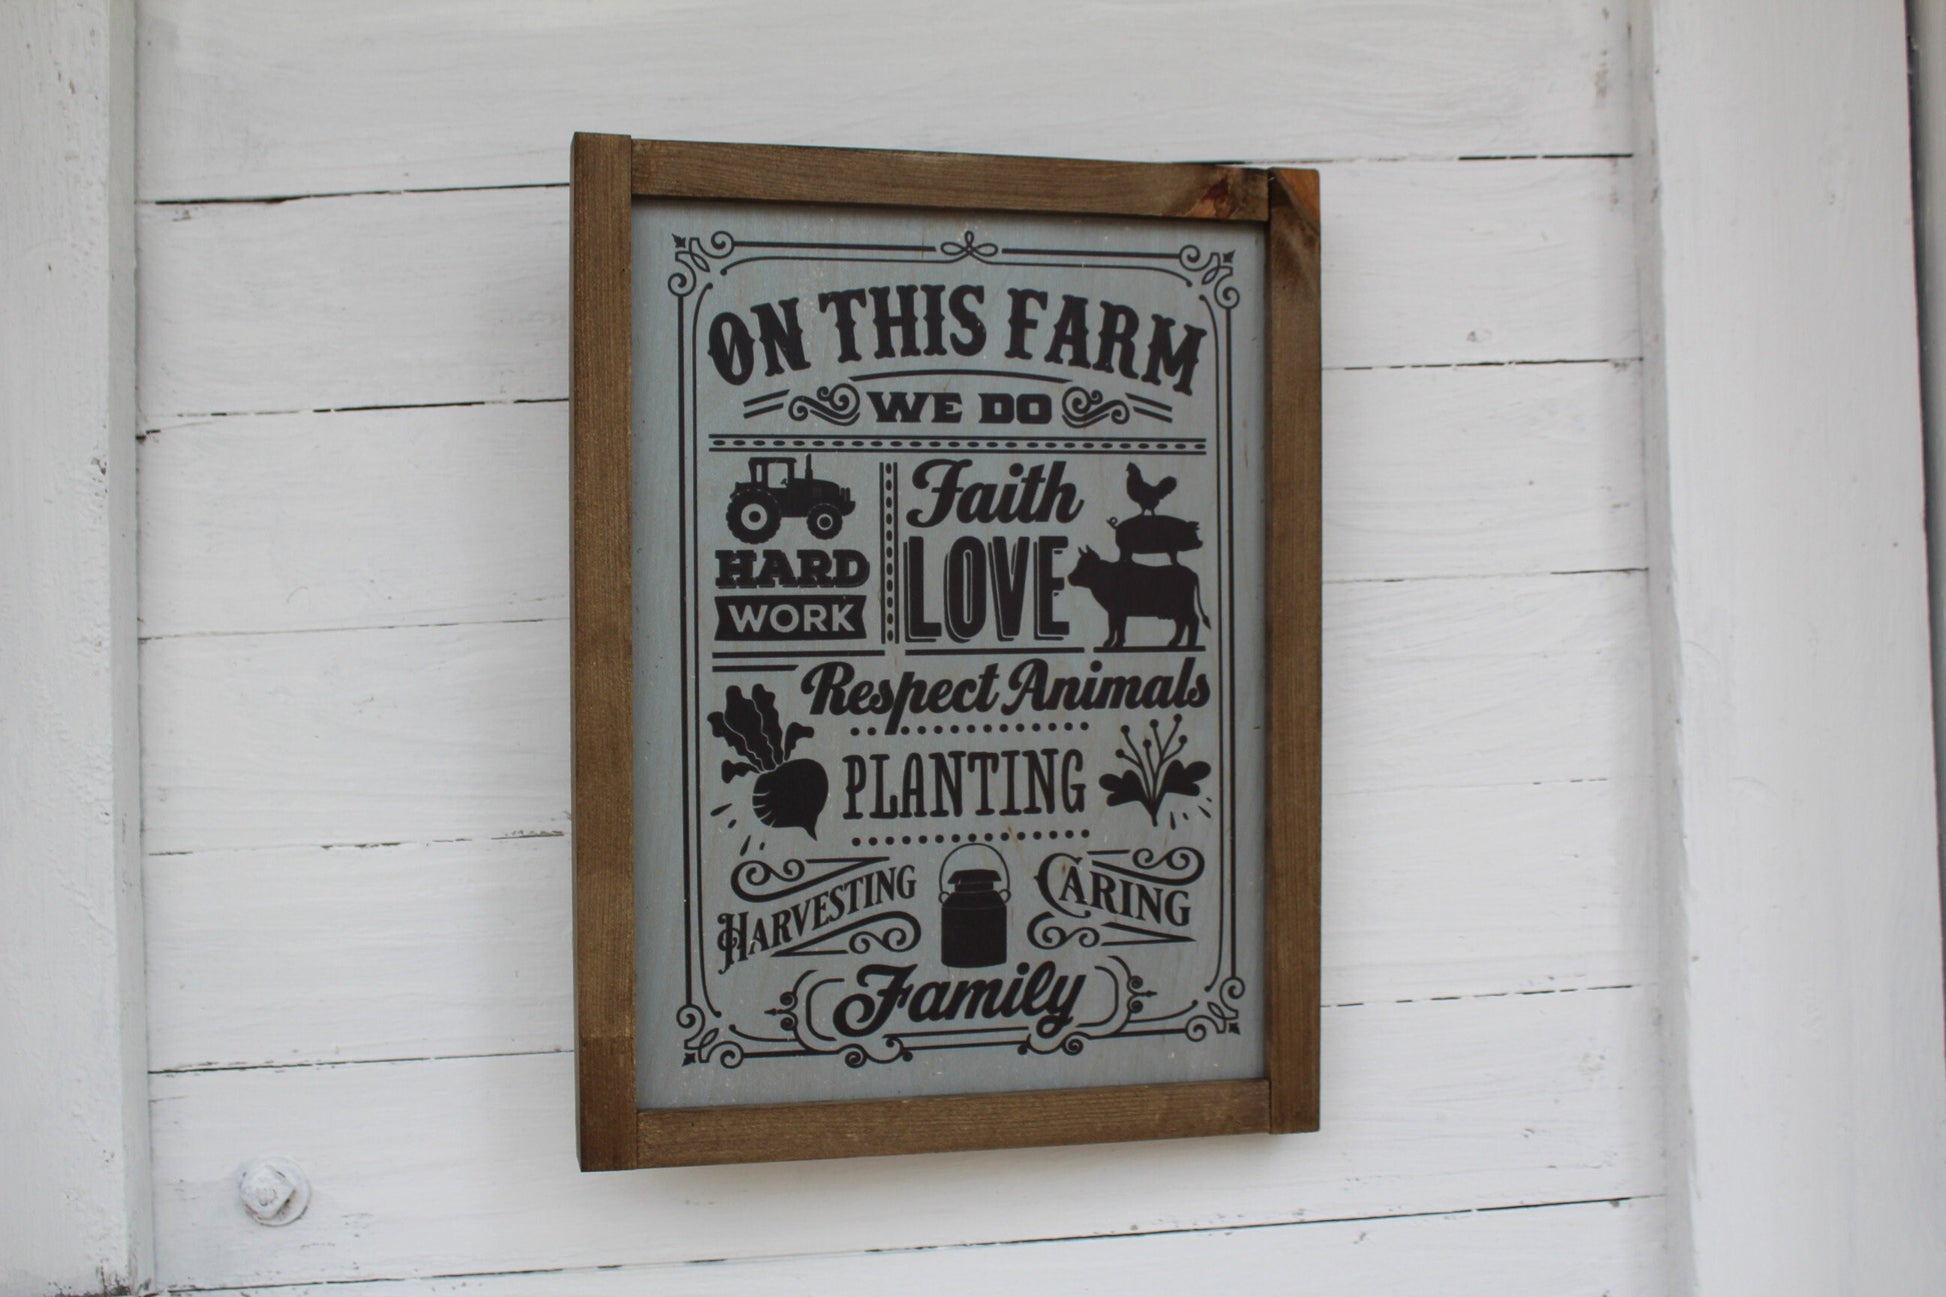 Farm Life Wood Sign On The Farm Love Work Tractor Faith Family Caring List of Quotes Farmhouse Rustic Barn Wood Decoration Pig Rooster Cow